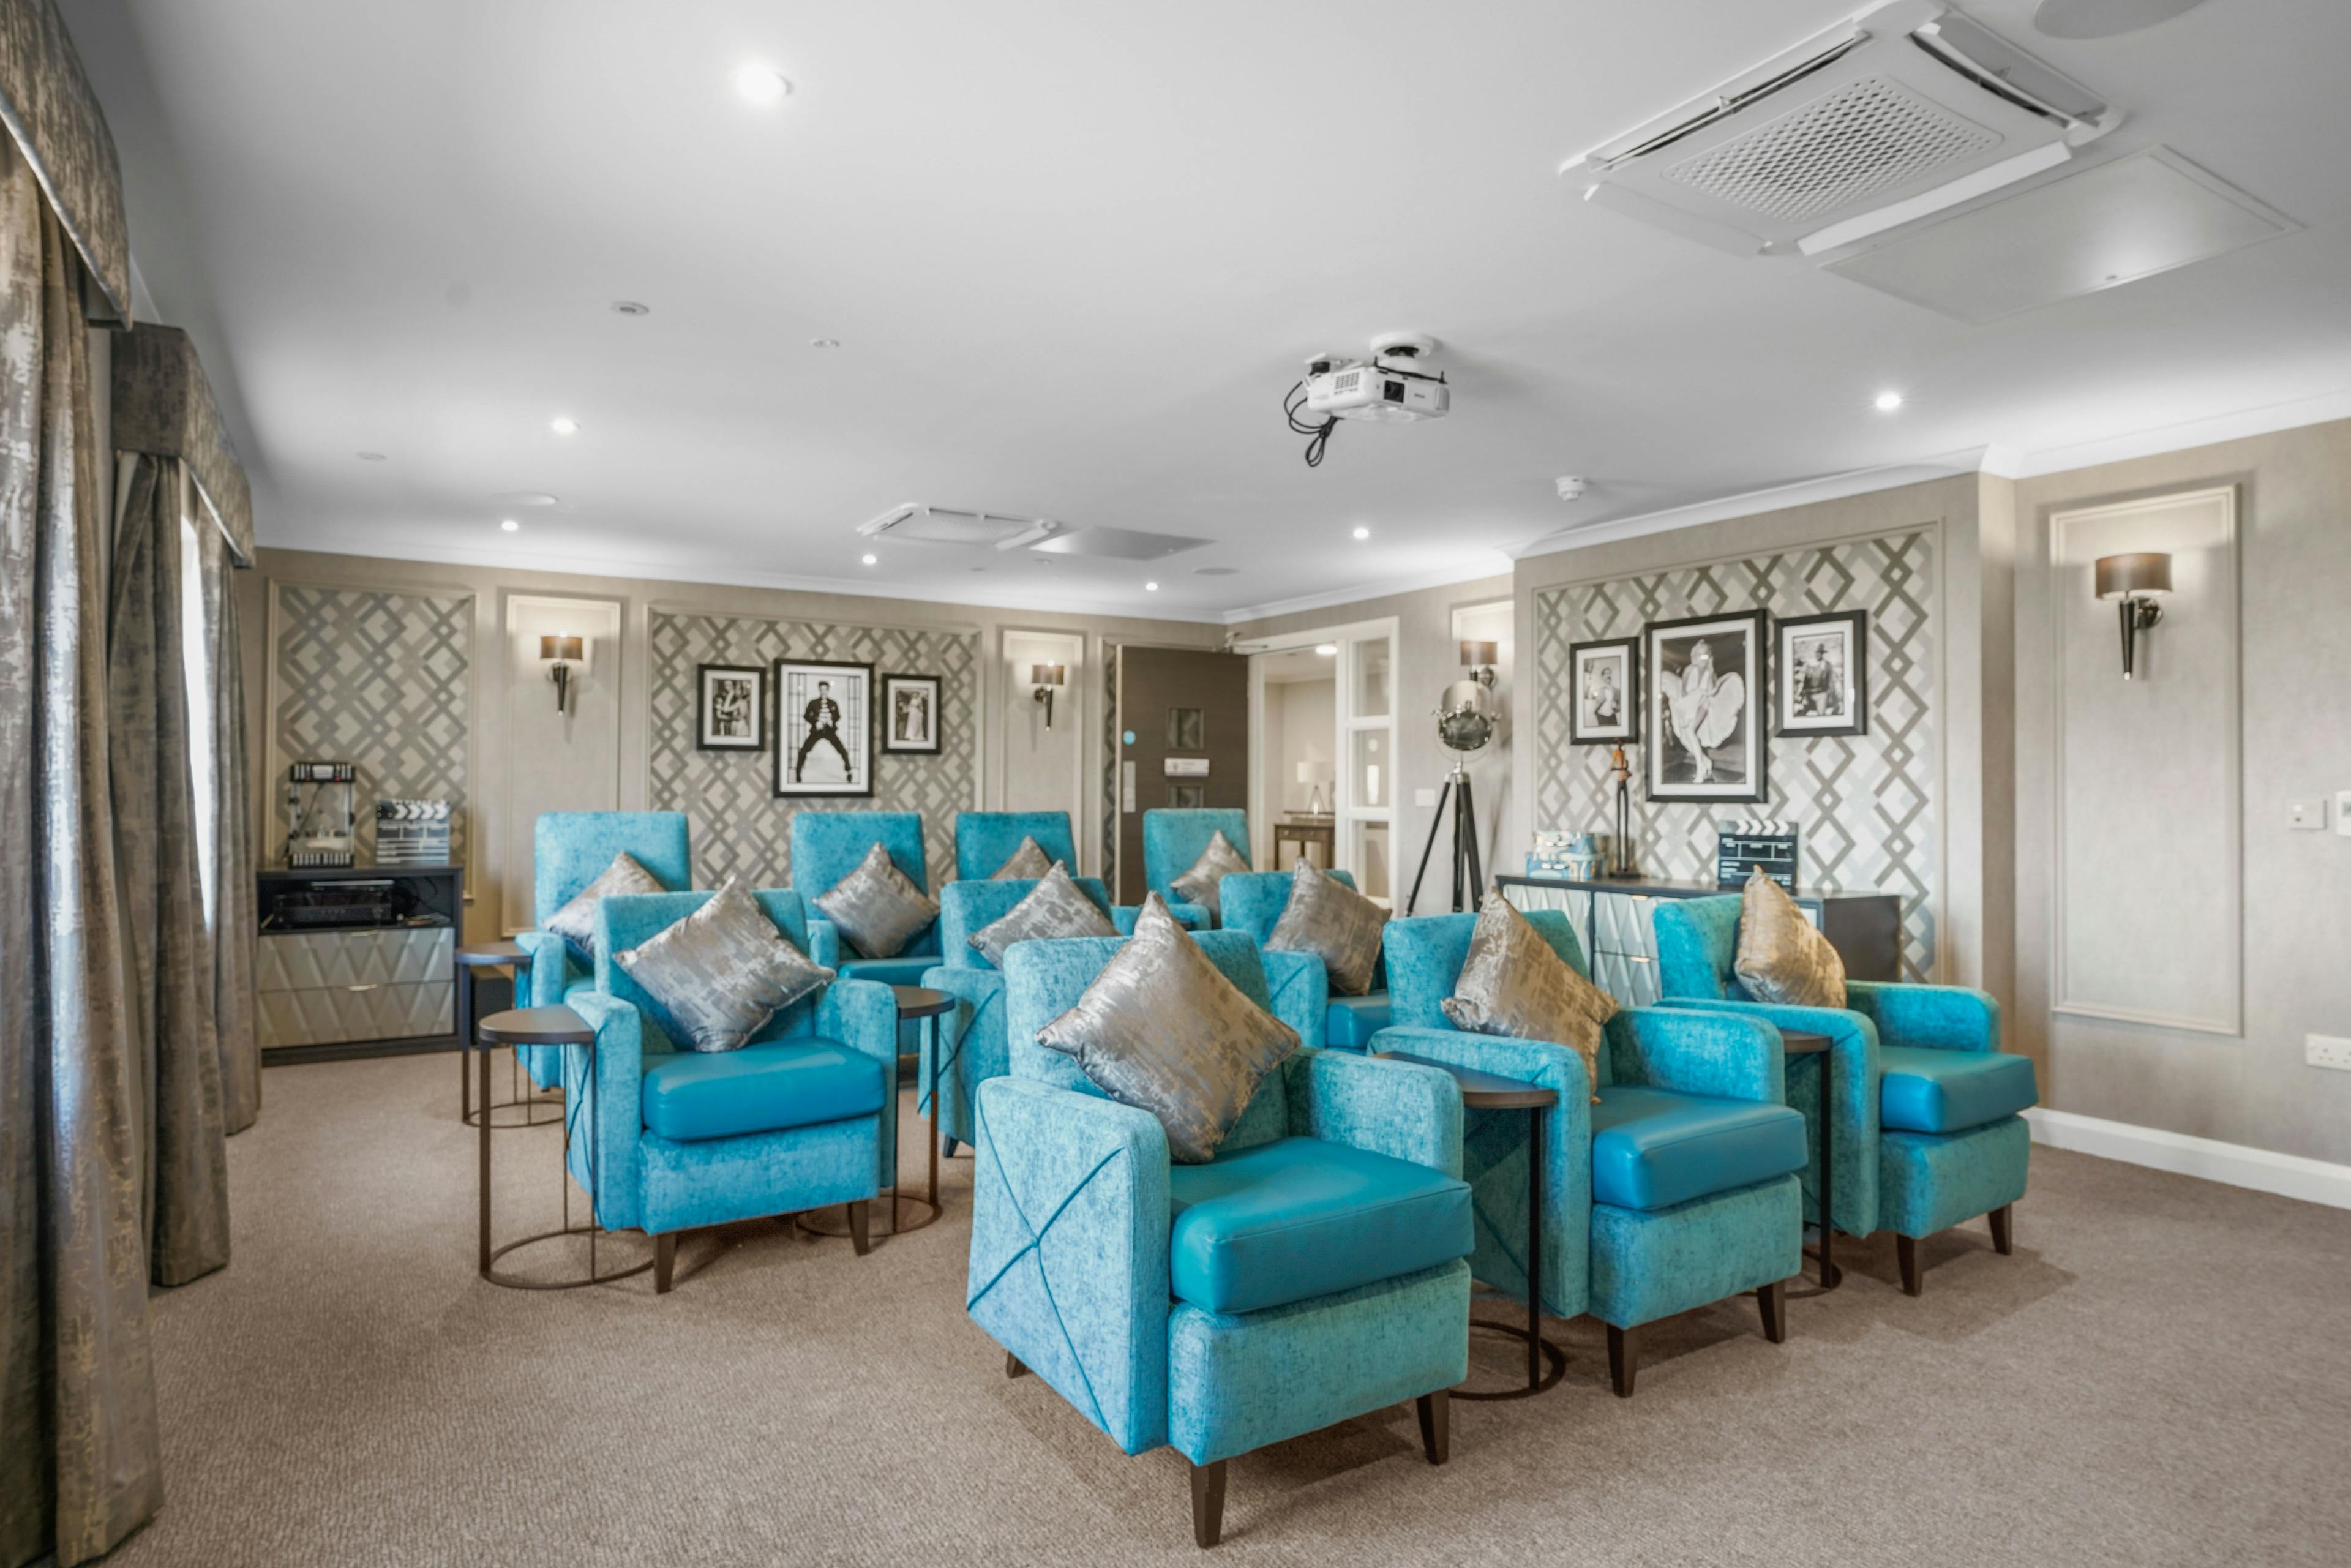 Cinema of Cloverleaf care home in Lincoln, Lincolnshire